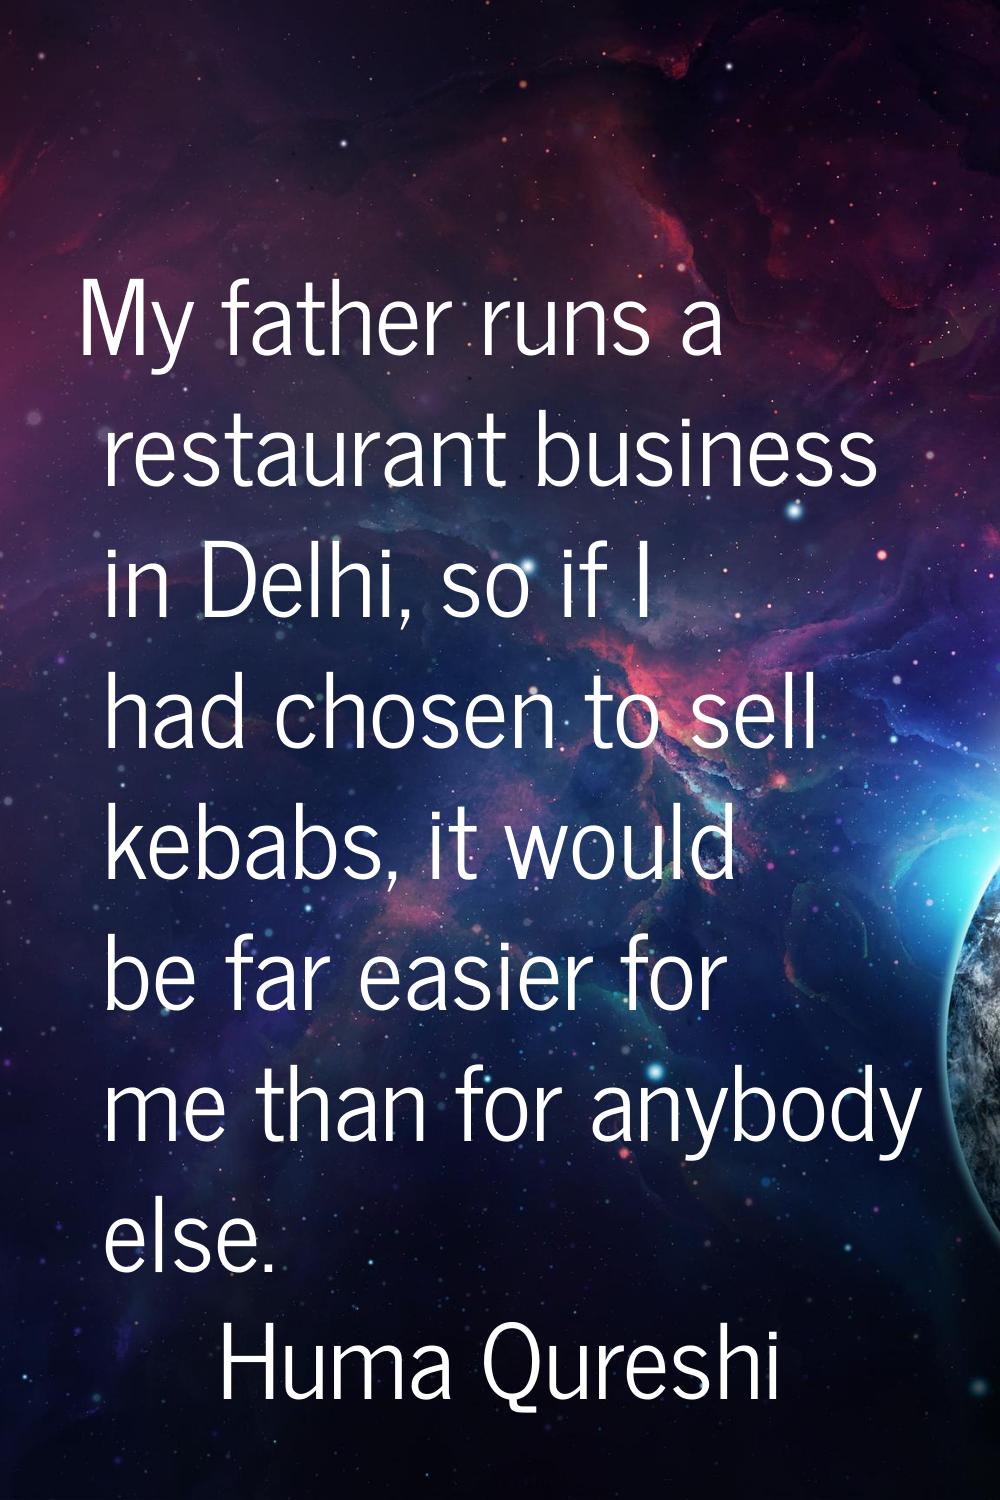 My father runs a restaurant business in Delhi, so if I had chosen to sell kebabs, it would be far e